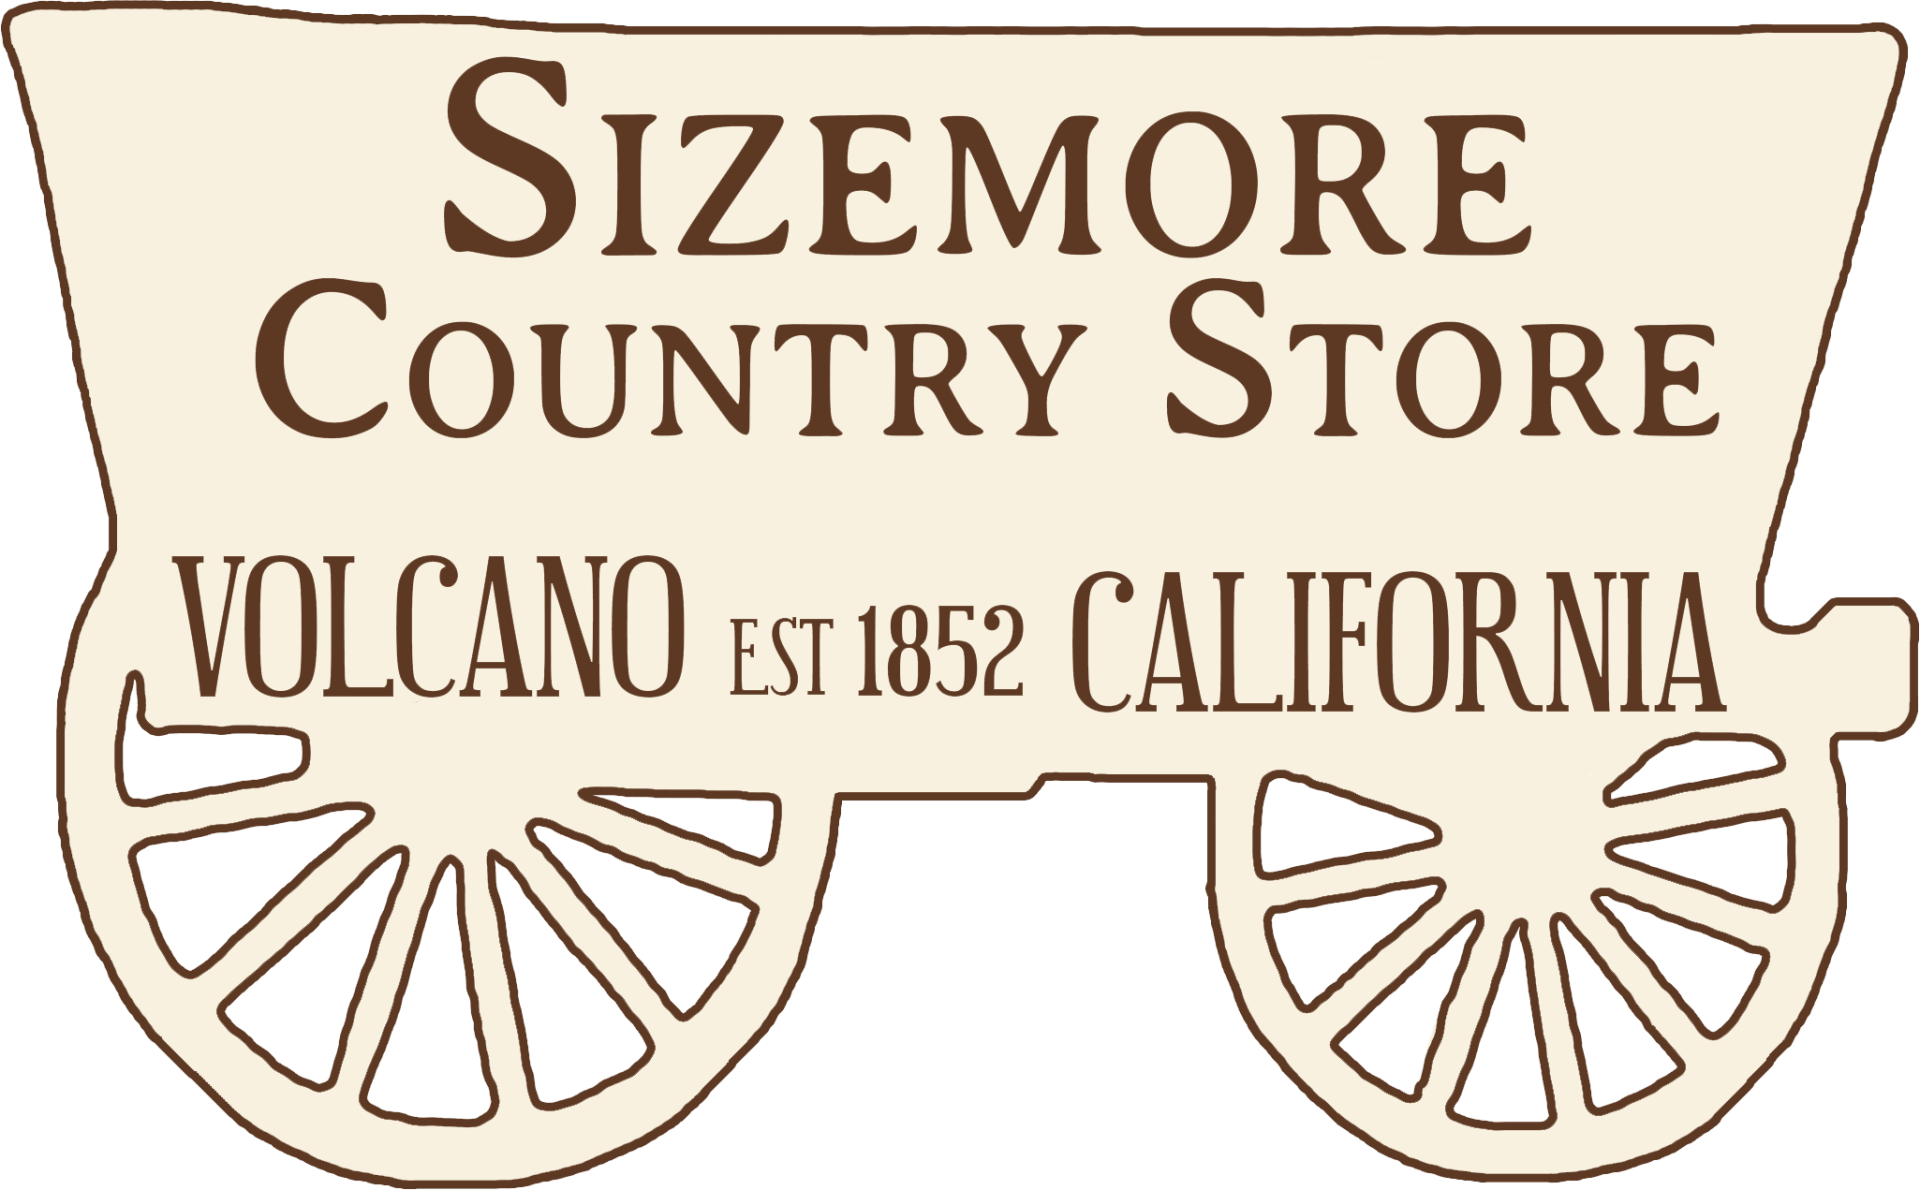 Sizemore Country Store logo